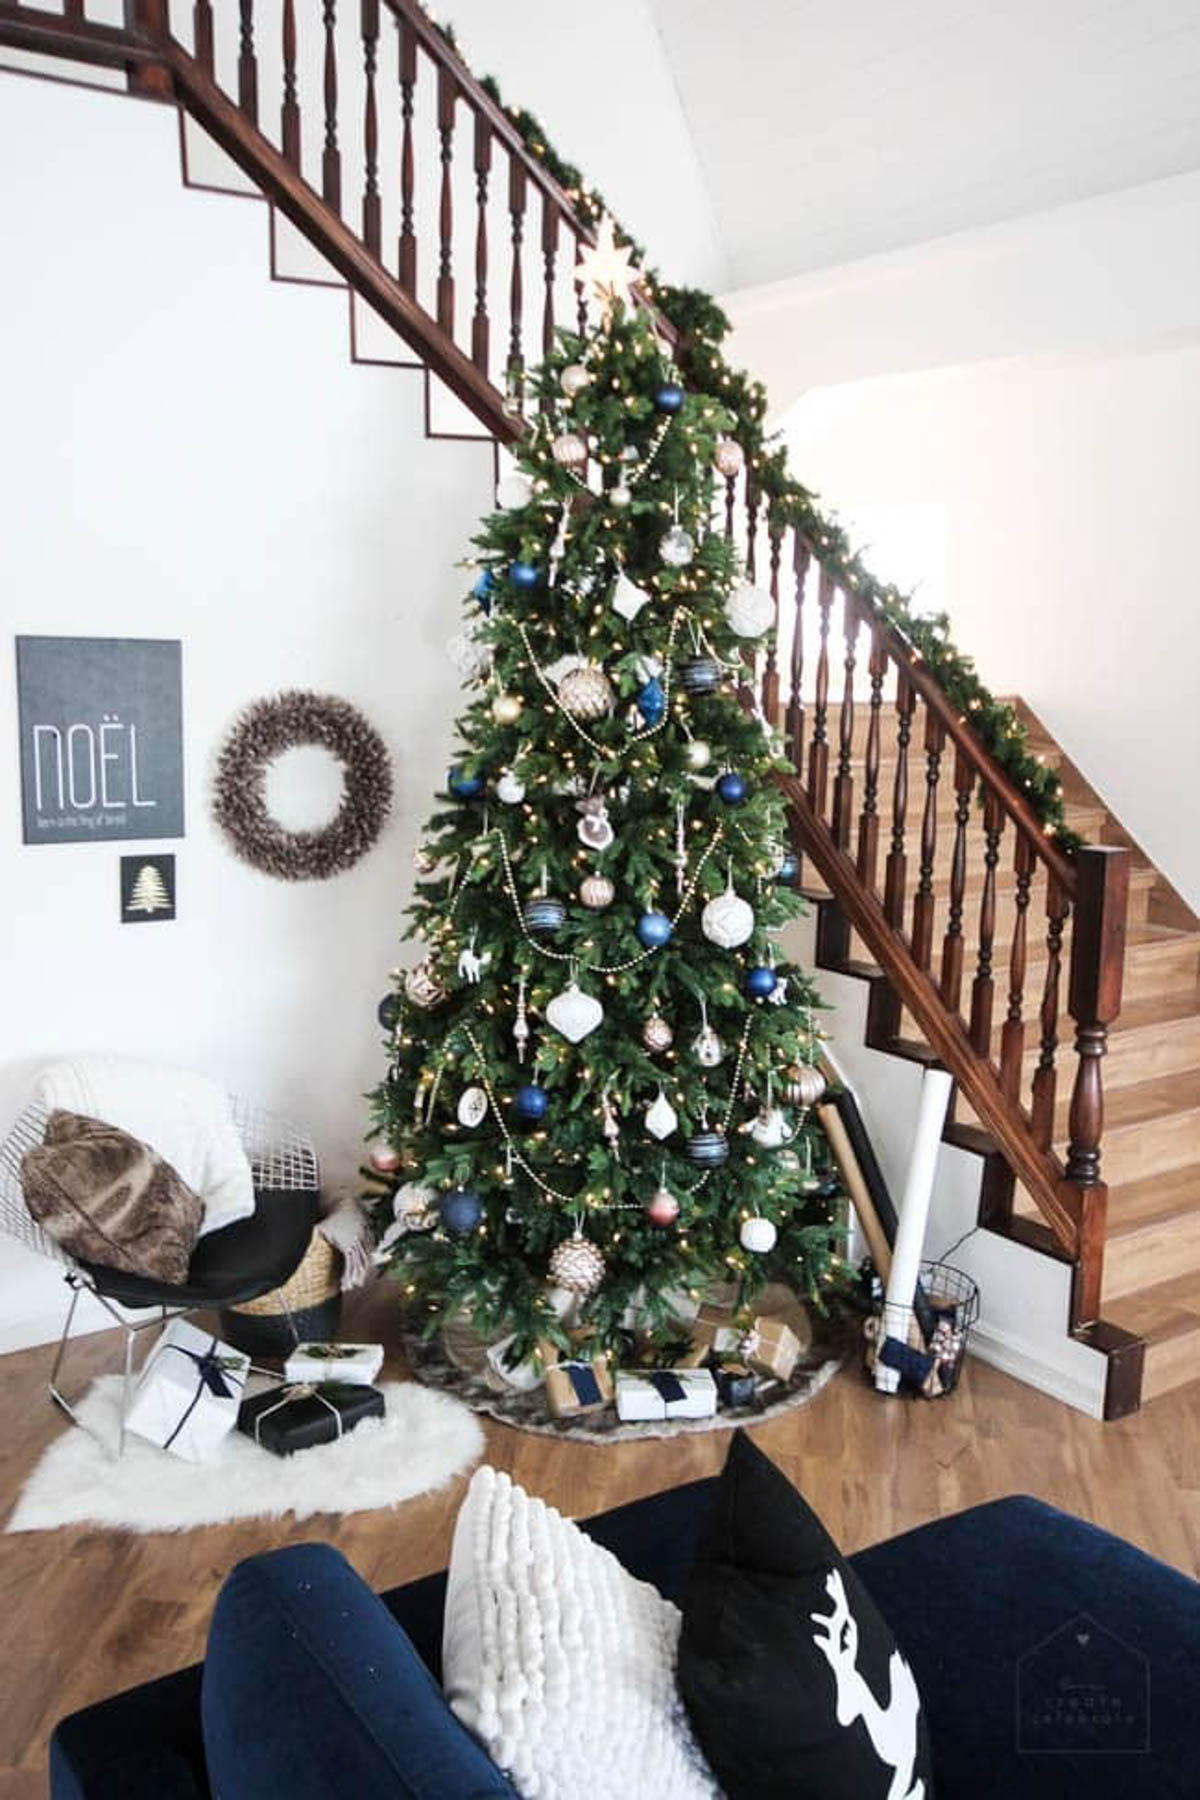 Decorated designer Christmas tree near a couch and stairway.